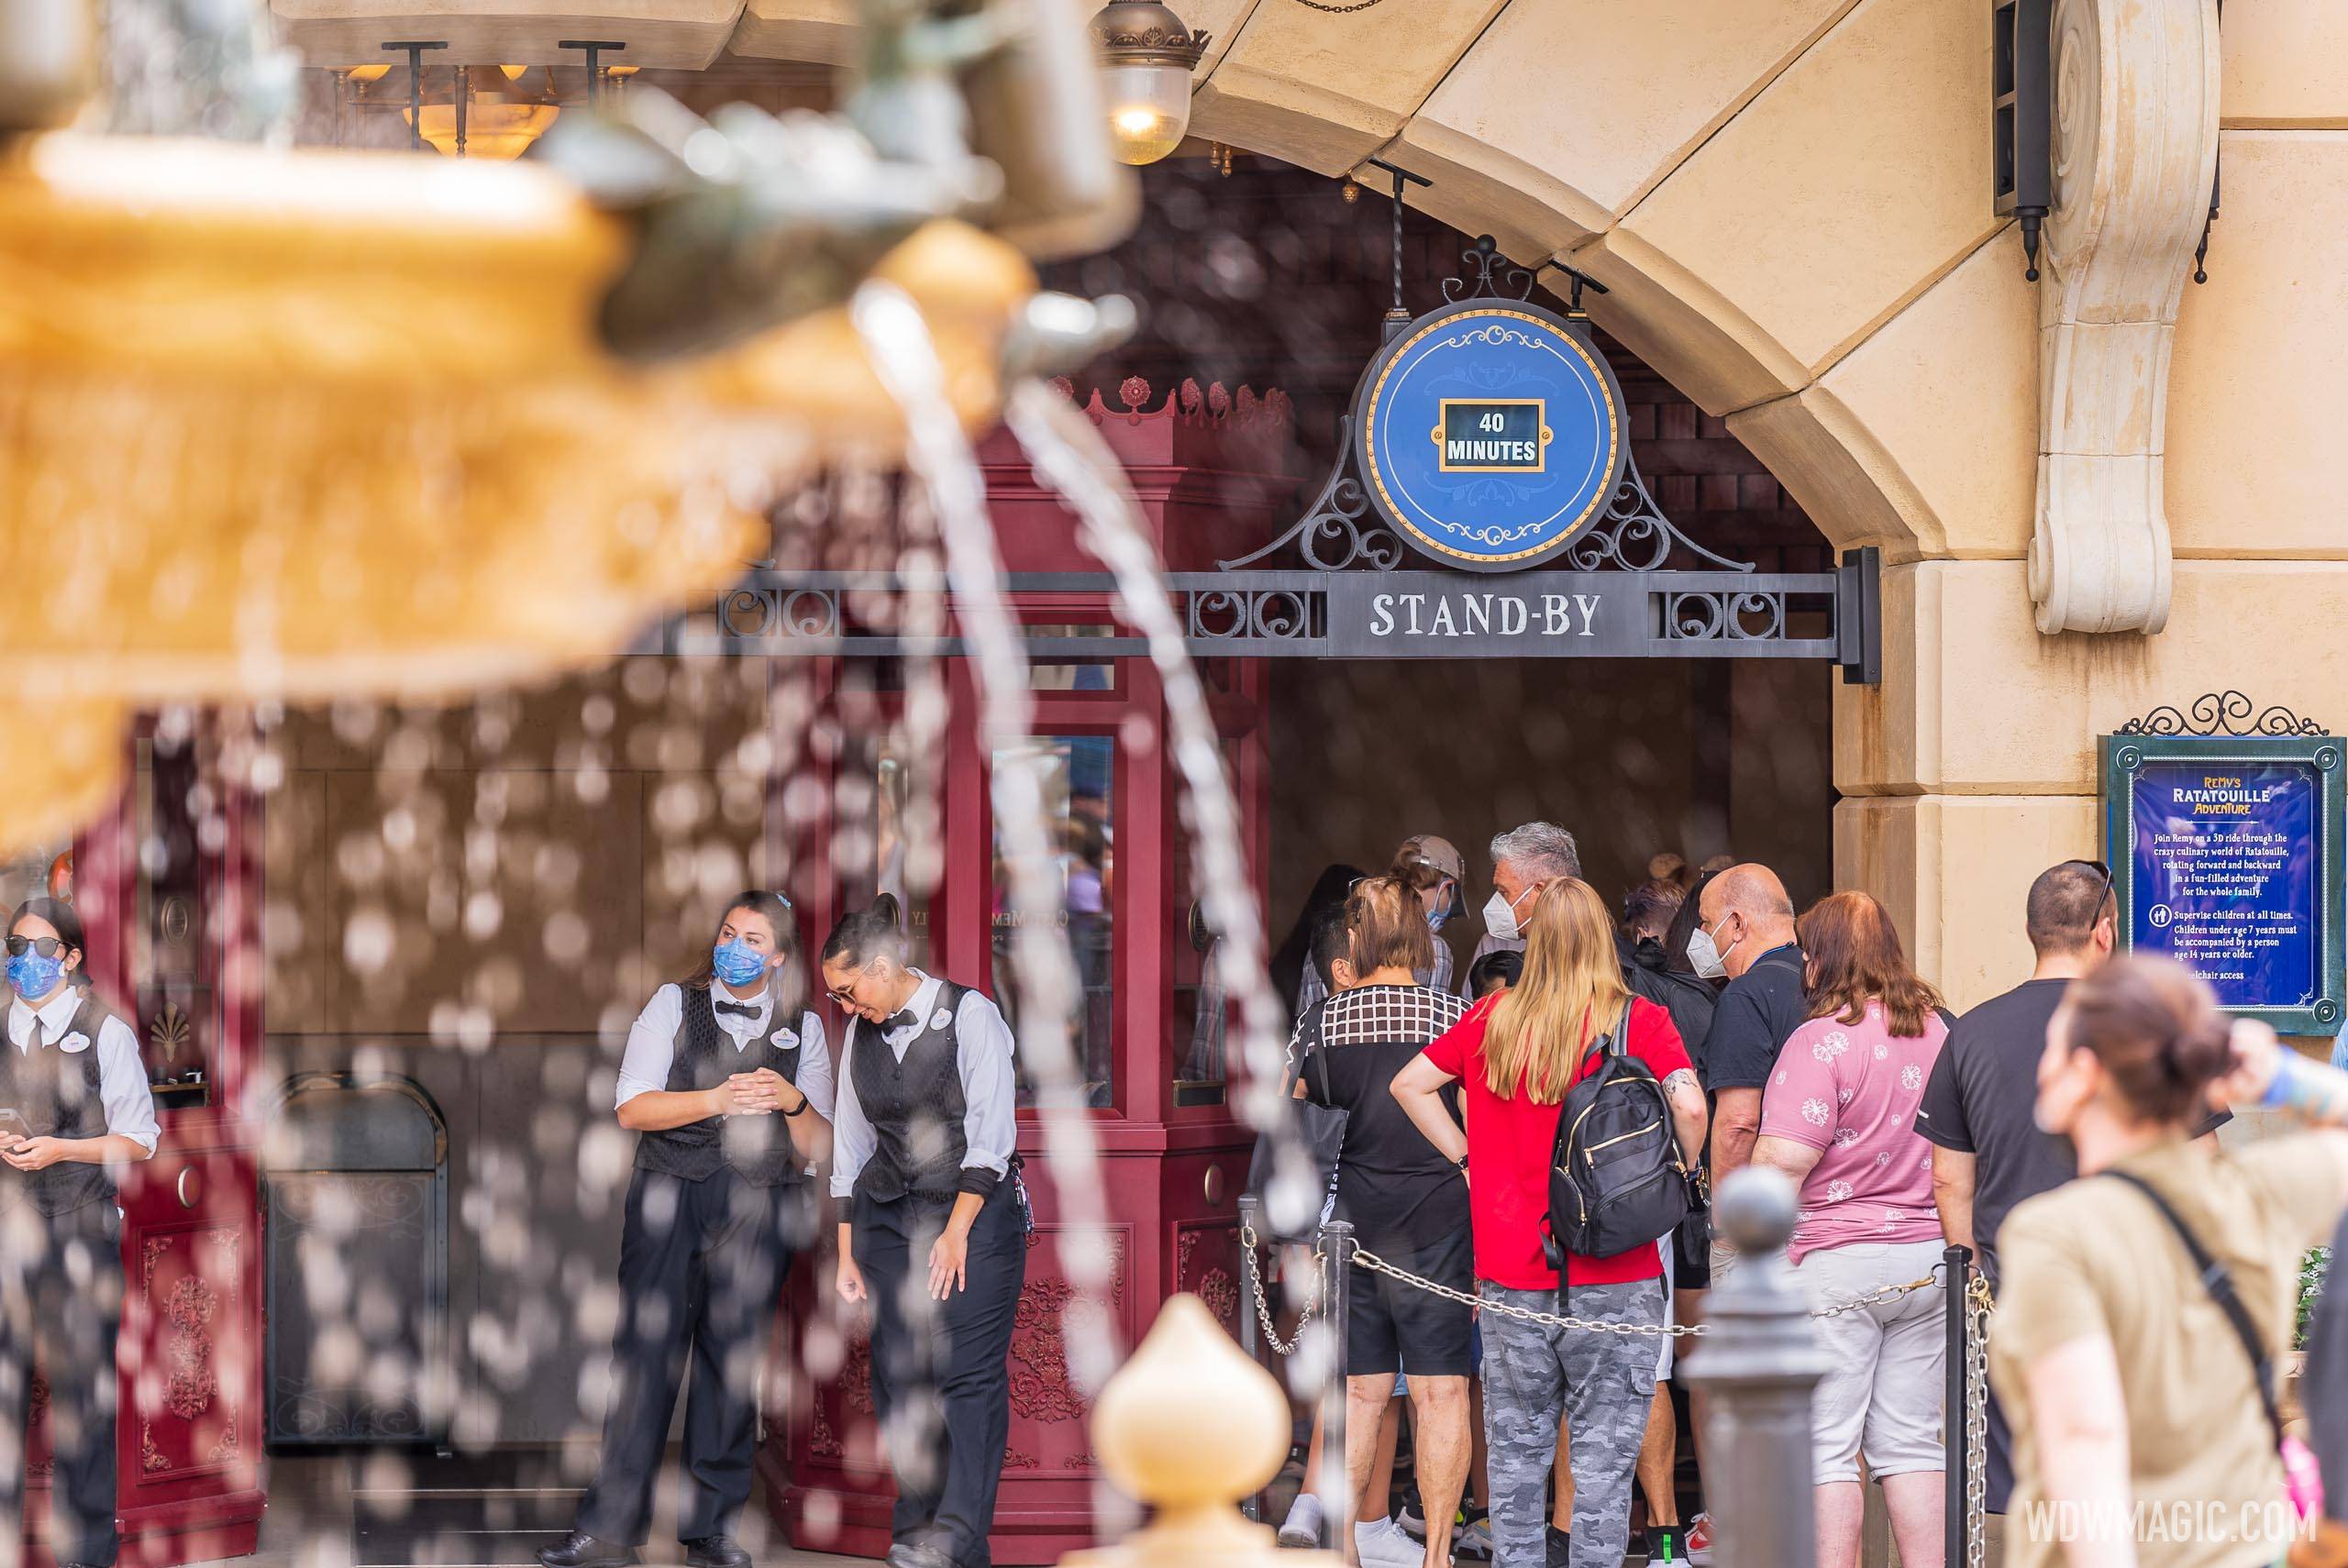 Standby line opens at EPCOT's Remy's Ratatouille Adventure with congested walkways but moderate wait times